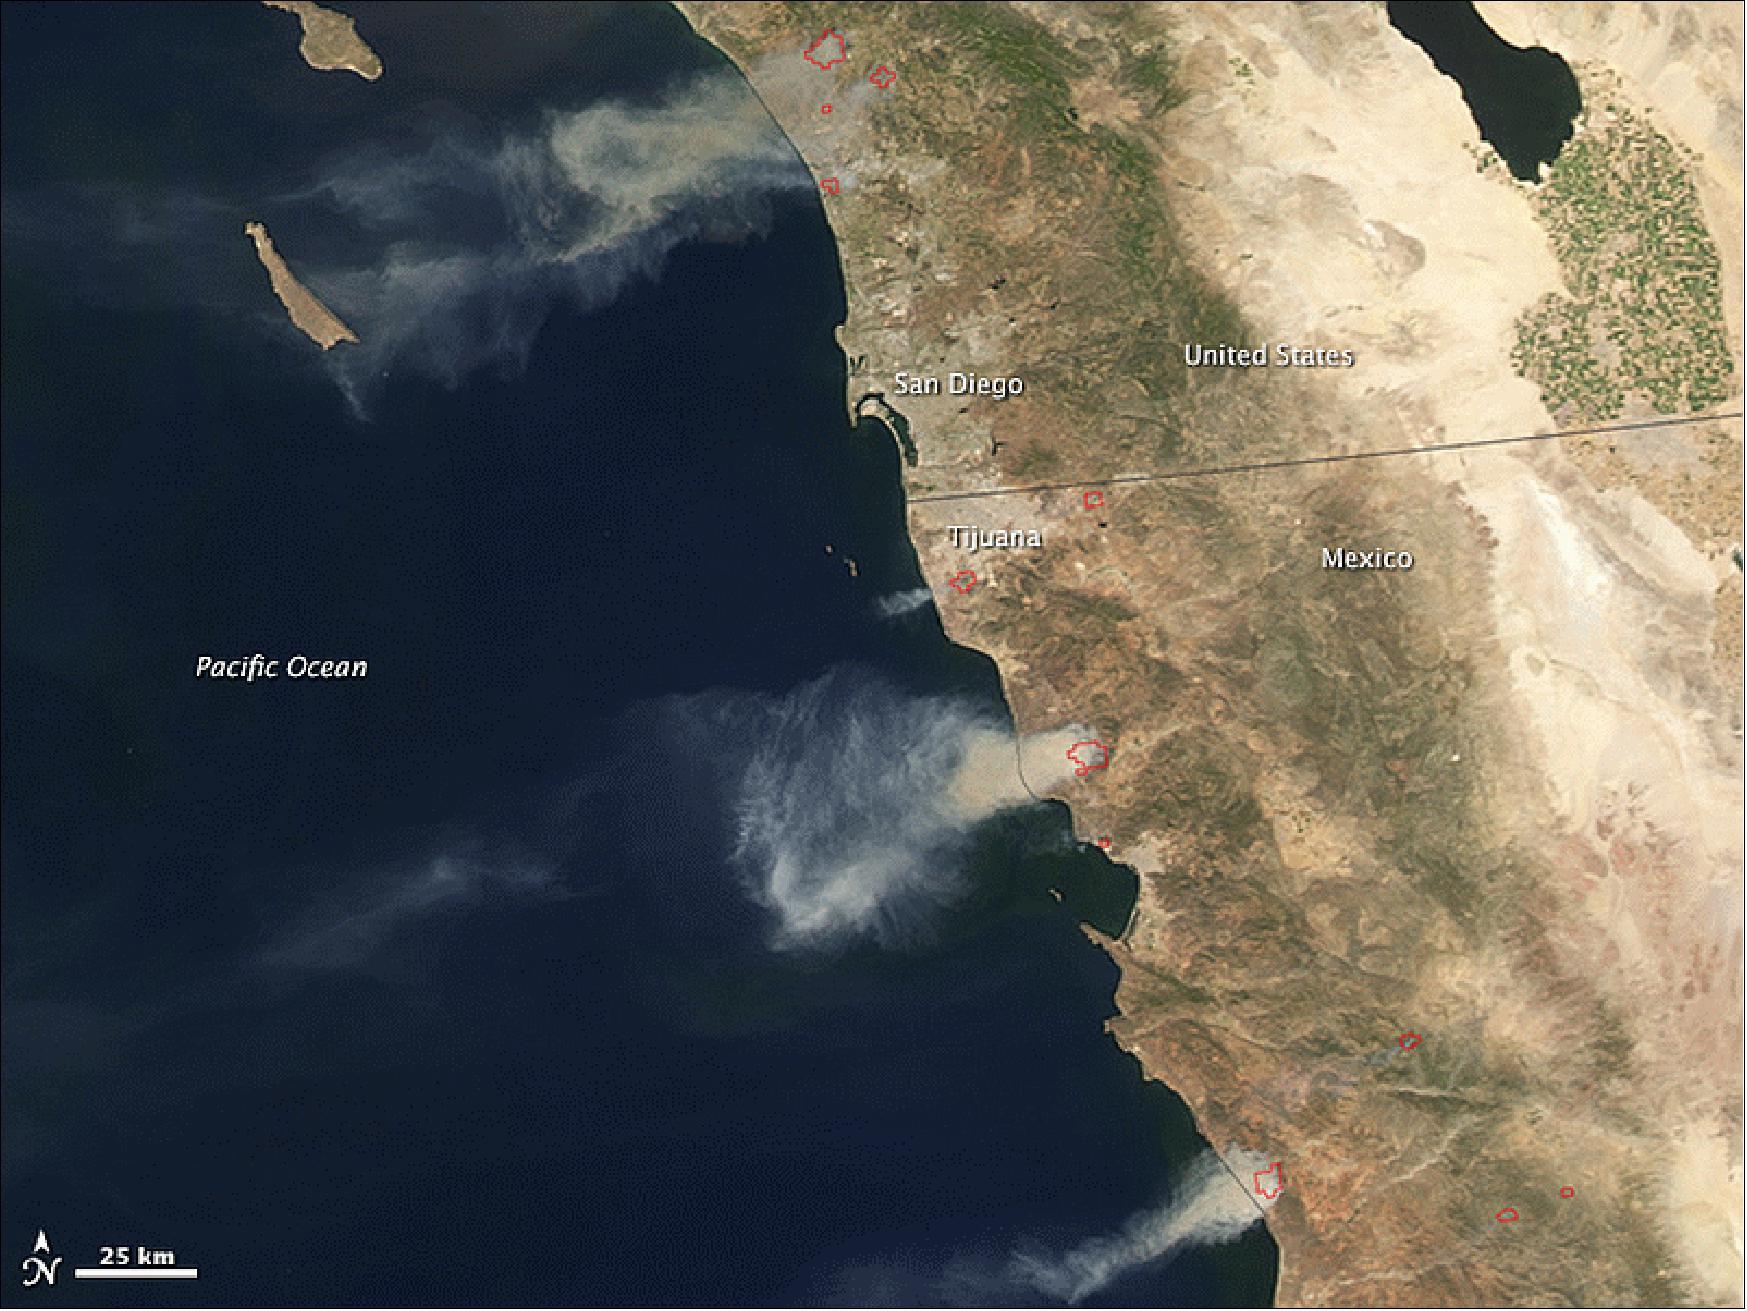 Figure 128: Fires in the Southwestern United States and Northern Mexico, acquired by MODIS on the Aqua spacecraft on May 14, 2014 (image credit: NASA Earth Observatory)